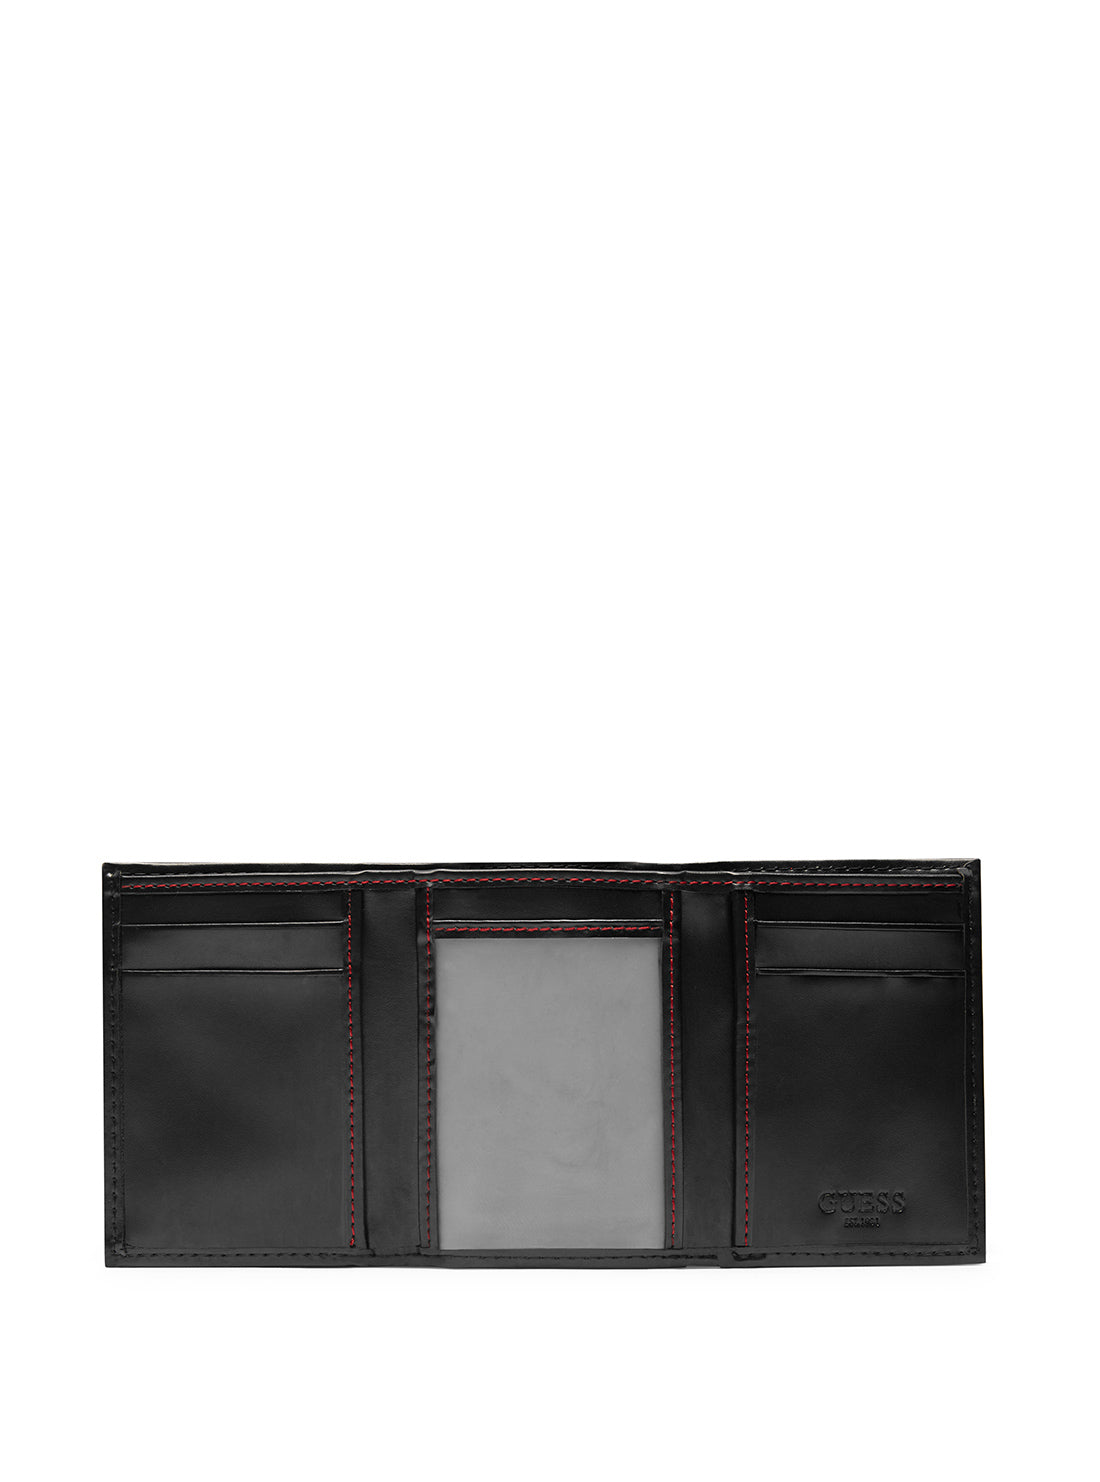 GUESS Black Dorito Trifold Wallet inside view